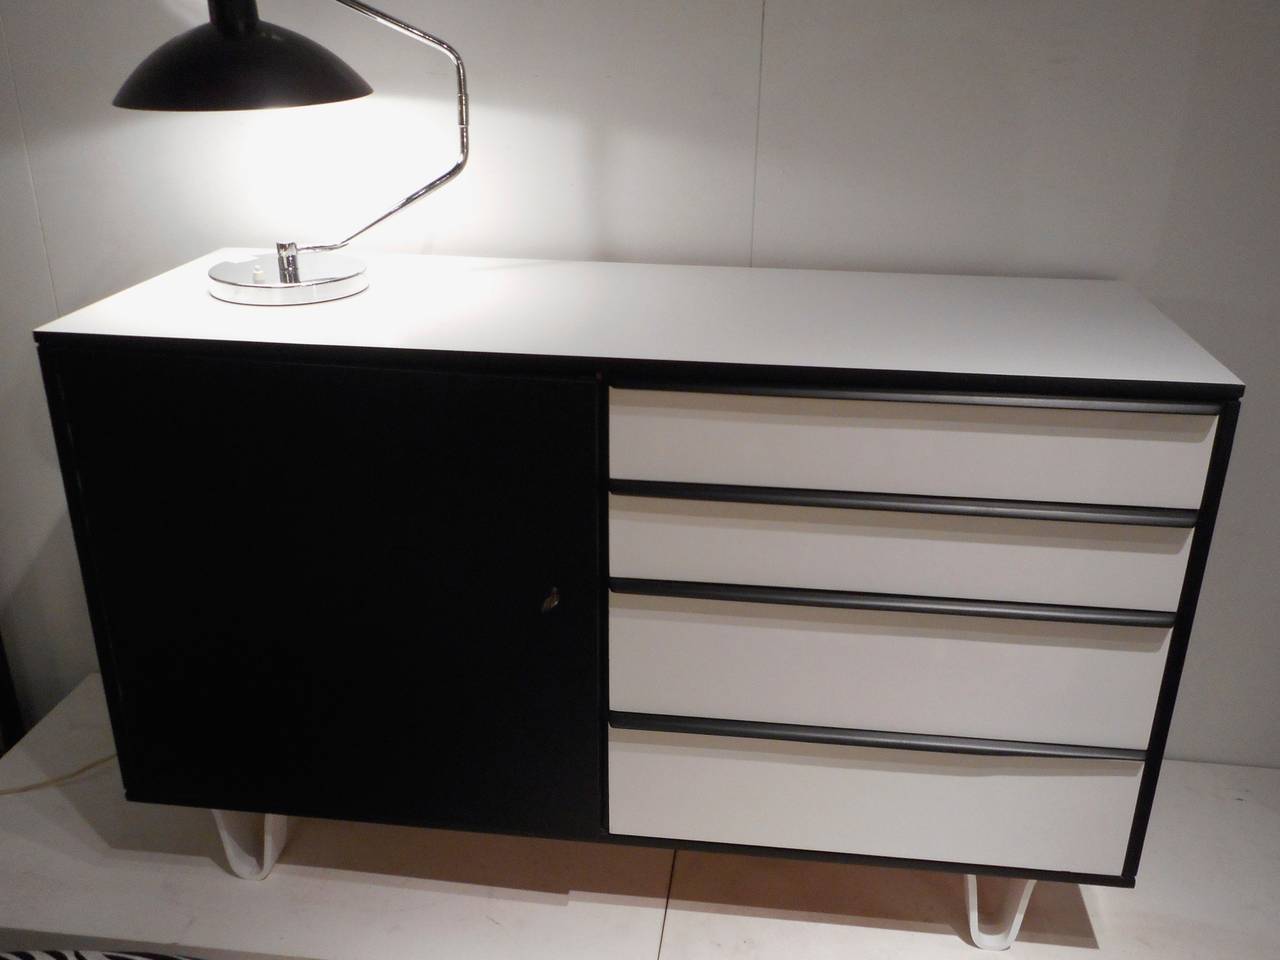 Black and white paint.
4 drawers.Birch and plywood interior.
Designed in 1954 for UMS Pastoe.
Original signed key.